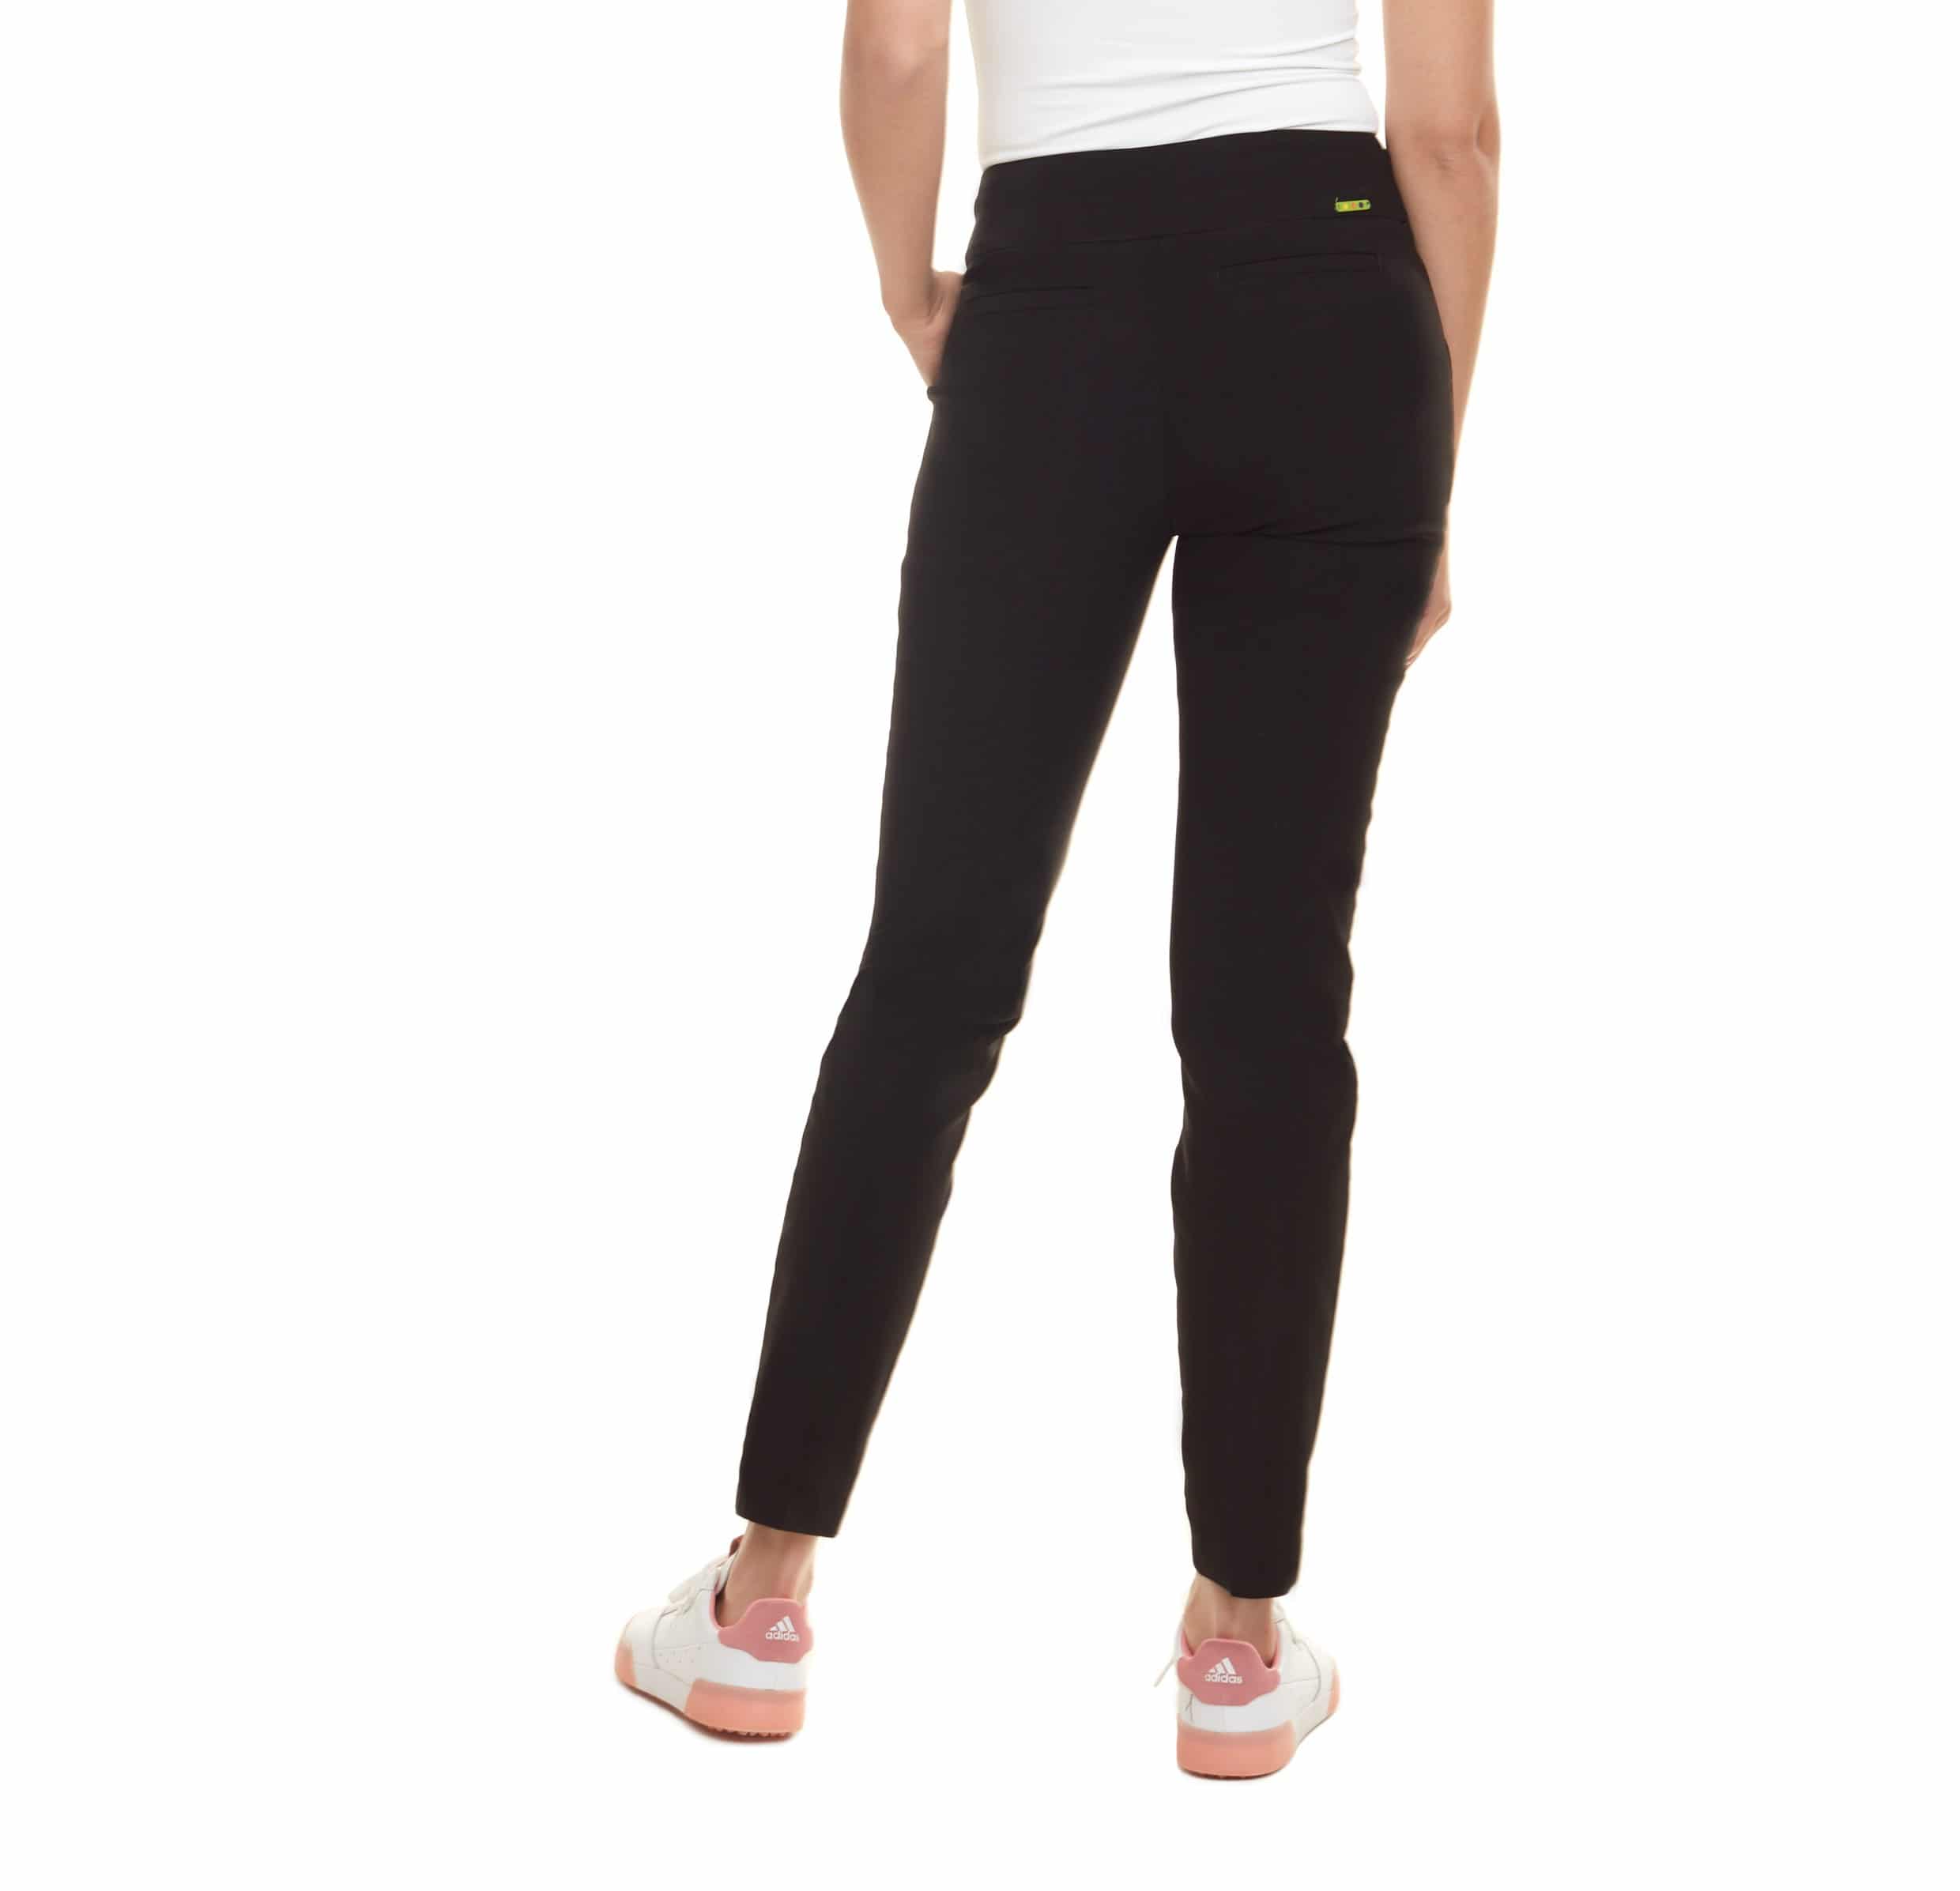 Swing Control Basic Core Women's Golf Ankle Pants - White - Fore Ladies -  Golf Dresses and Clothes, Tennis Skirts and Outfits, and Fashionable  Activewear